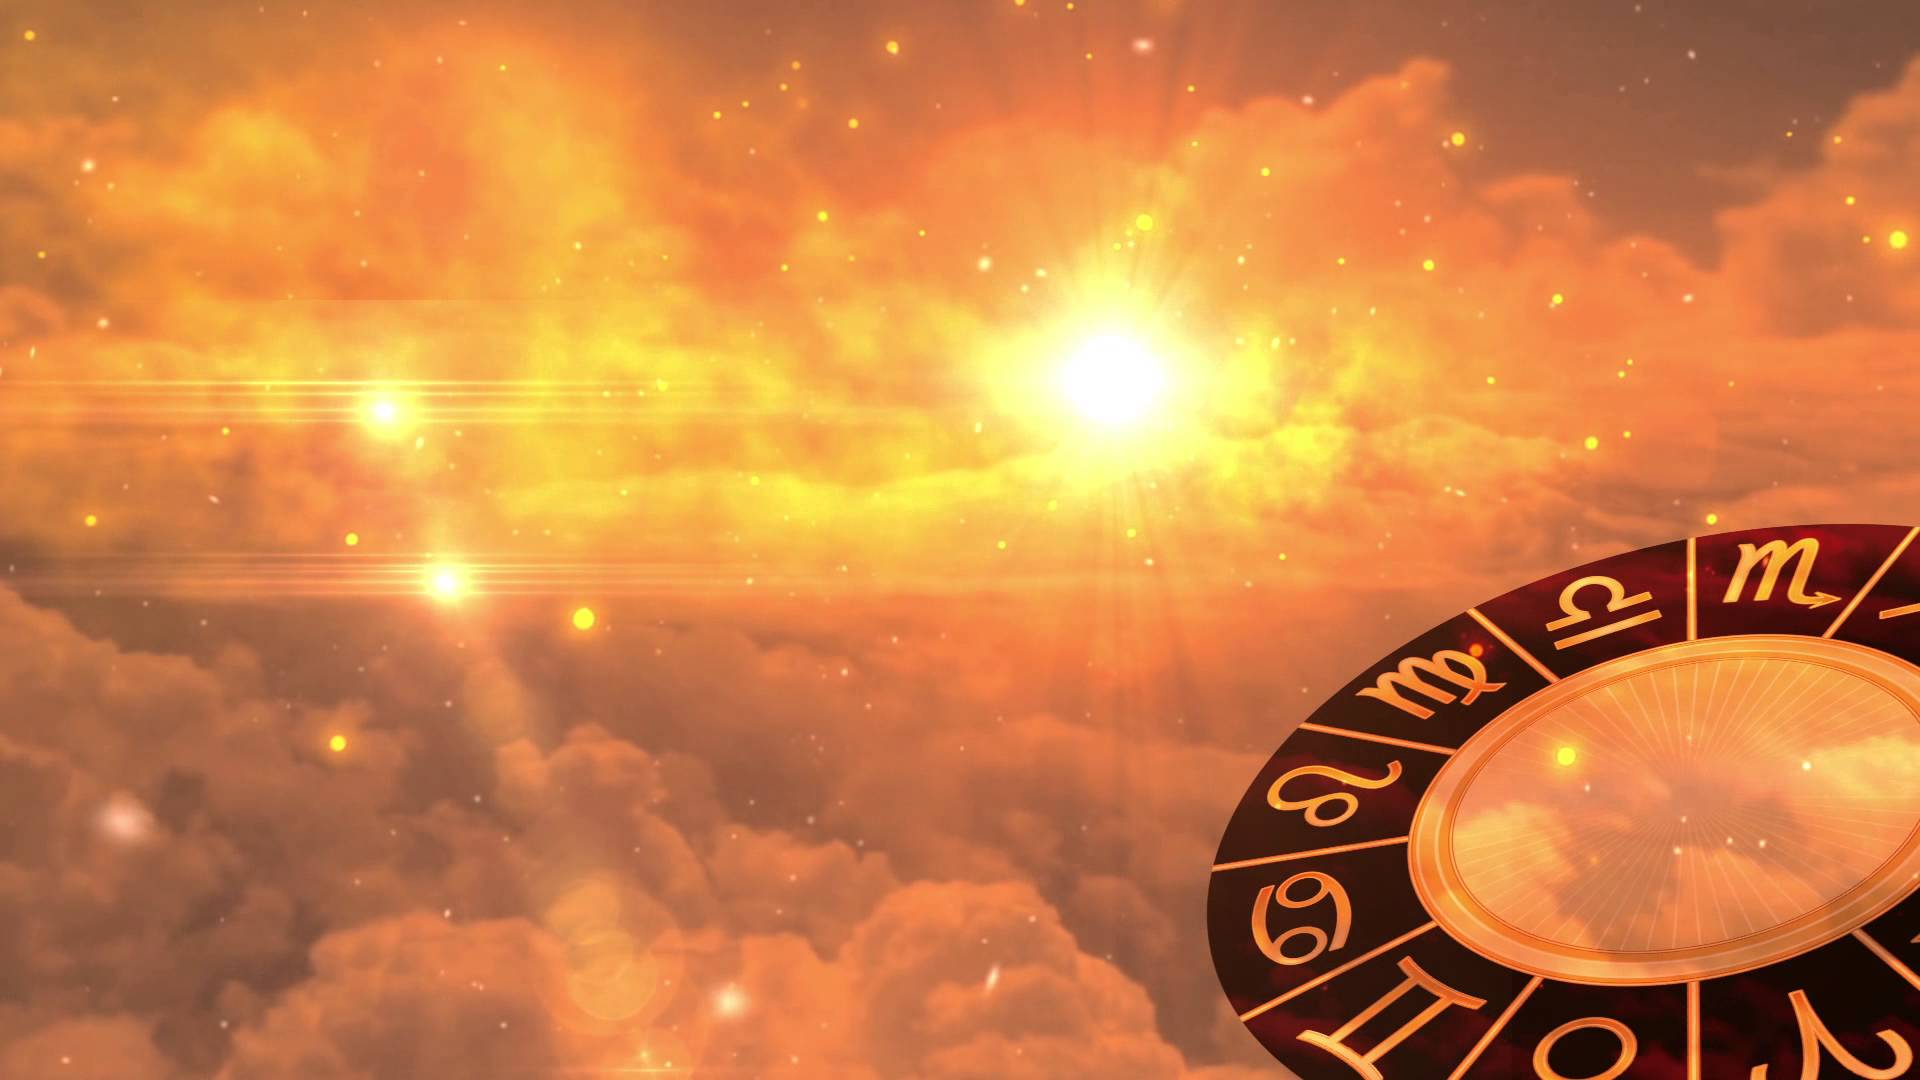 Astrology background free to use full hd Download - YouTube